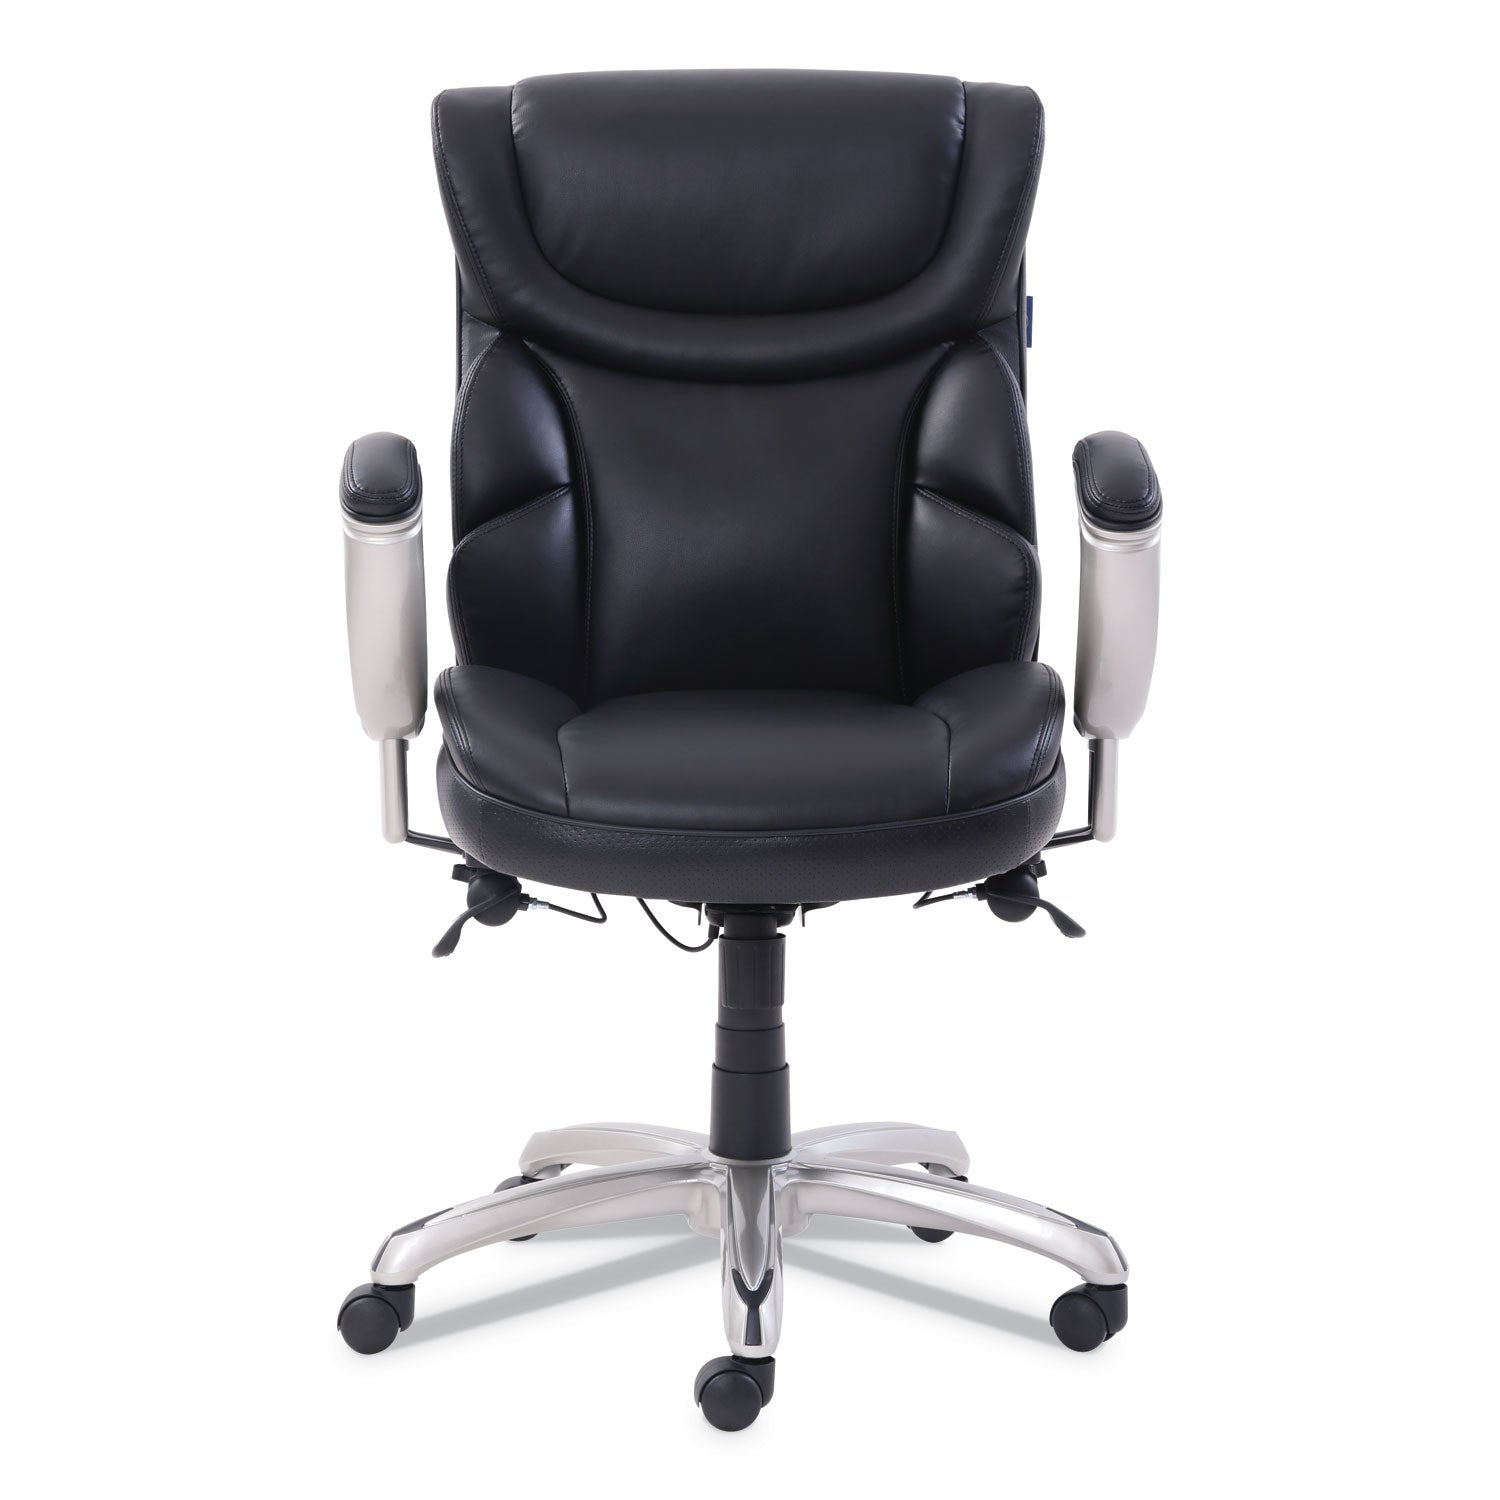 emerson-task-chair-supports-up-to-300-lb-1875-to-2175-seat-height-black-seat-back-silver-base_srj49711blk - 2